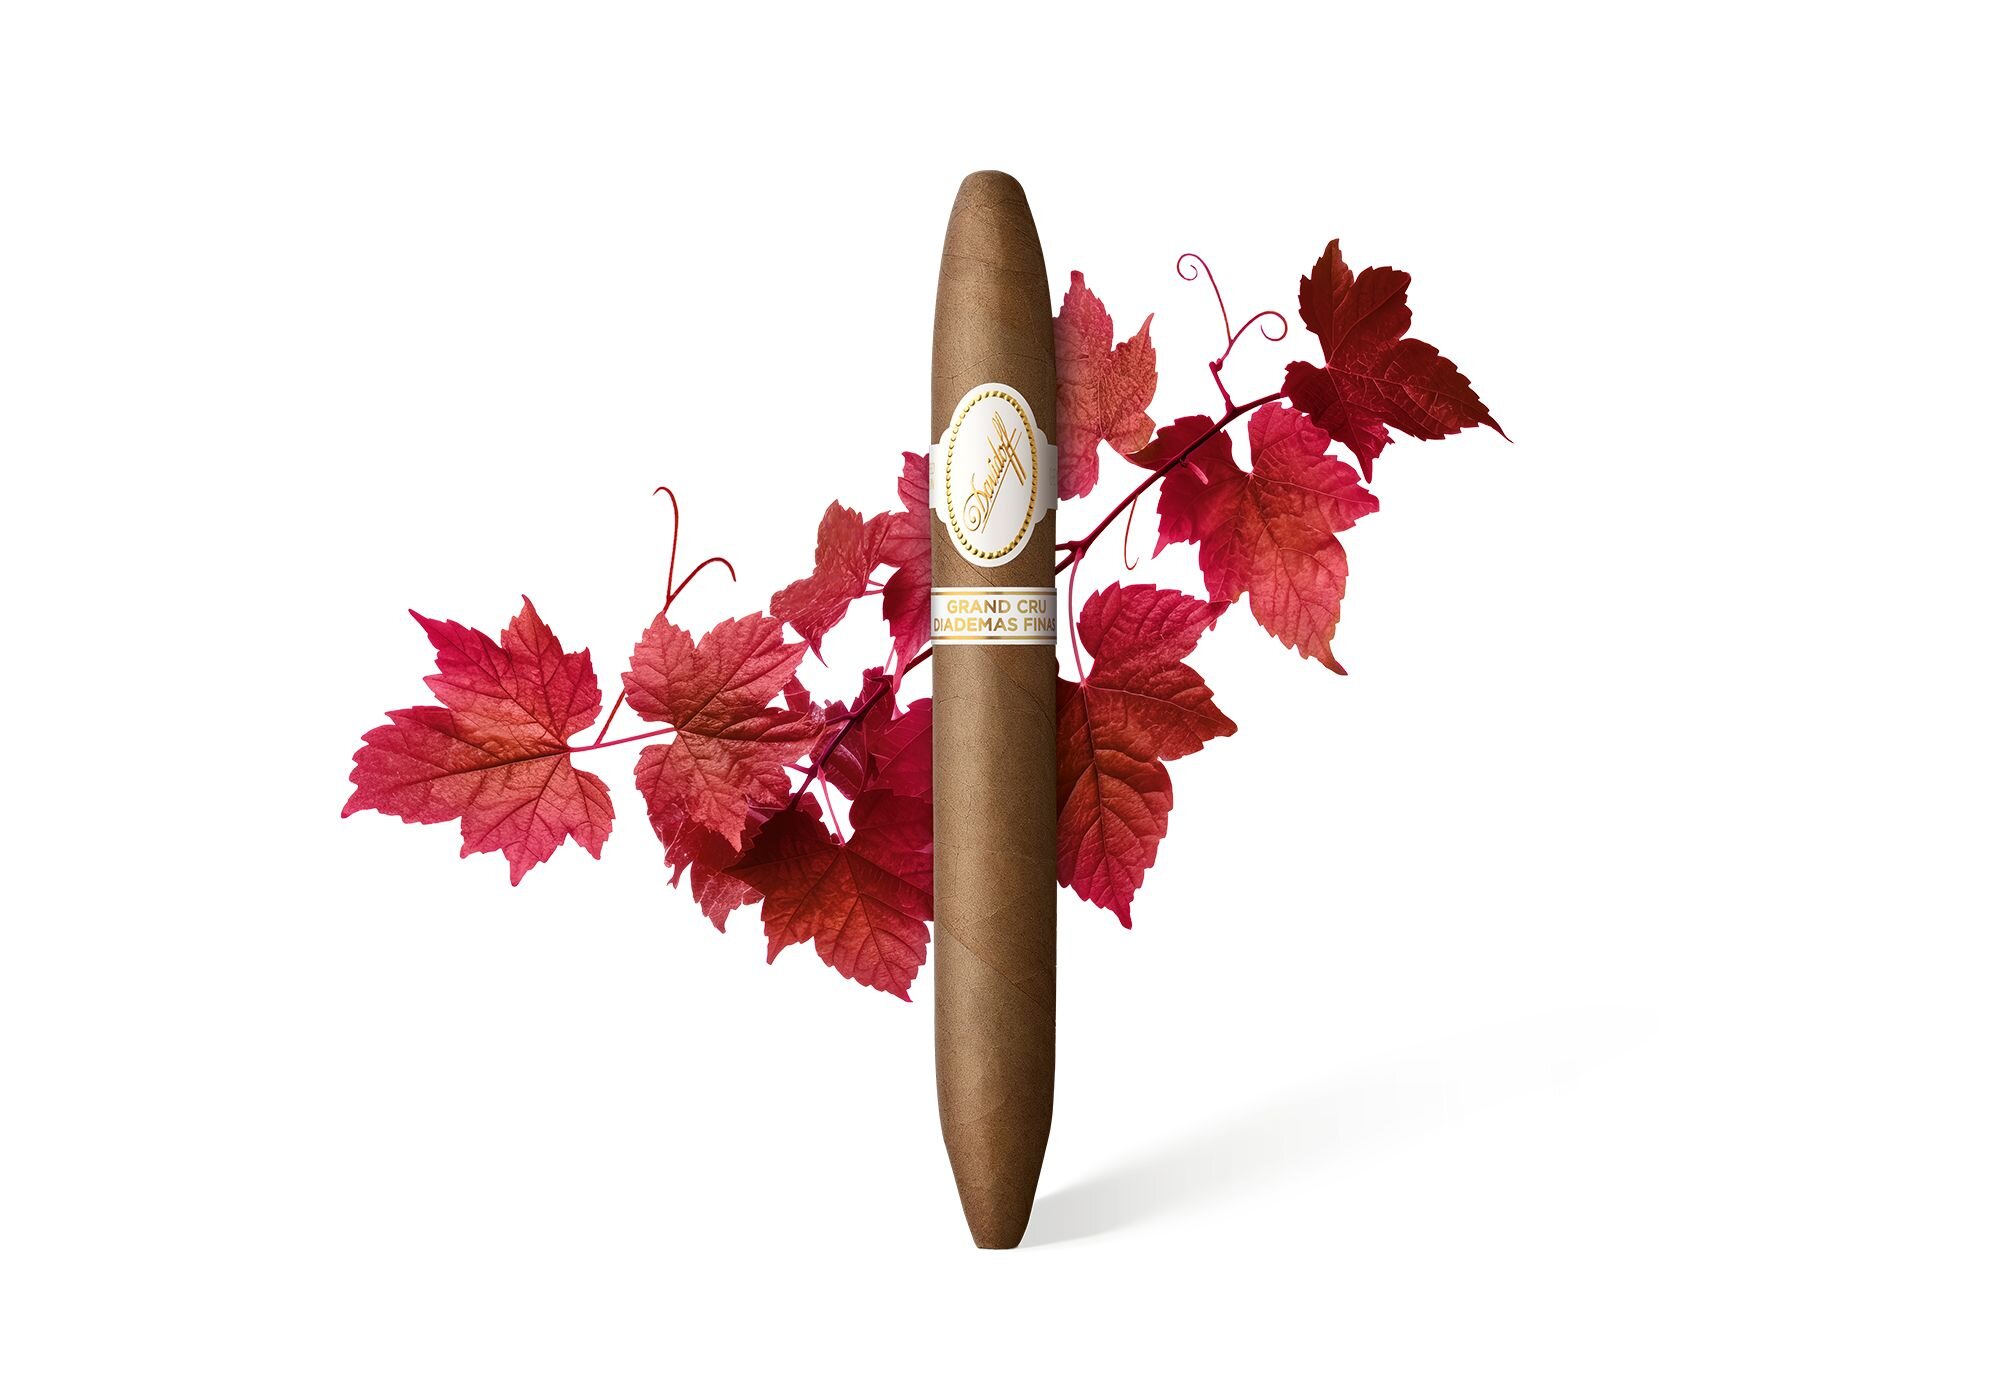 A Davidoff Grand Cru Diademas Finas Limited Edition Collection cigar with grape leaves behind it. 